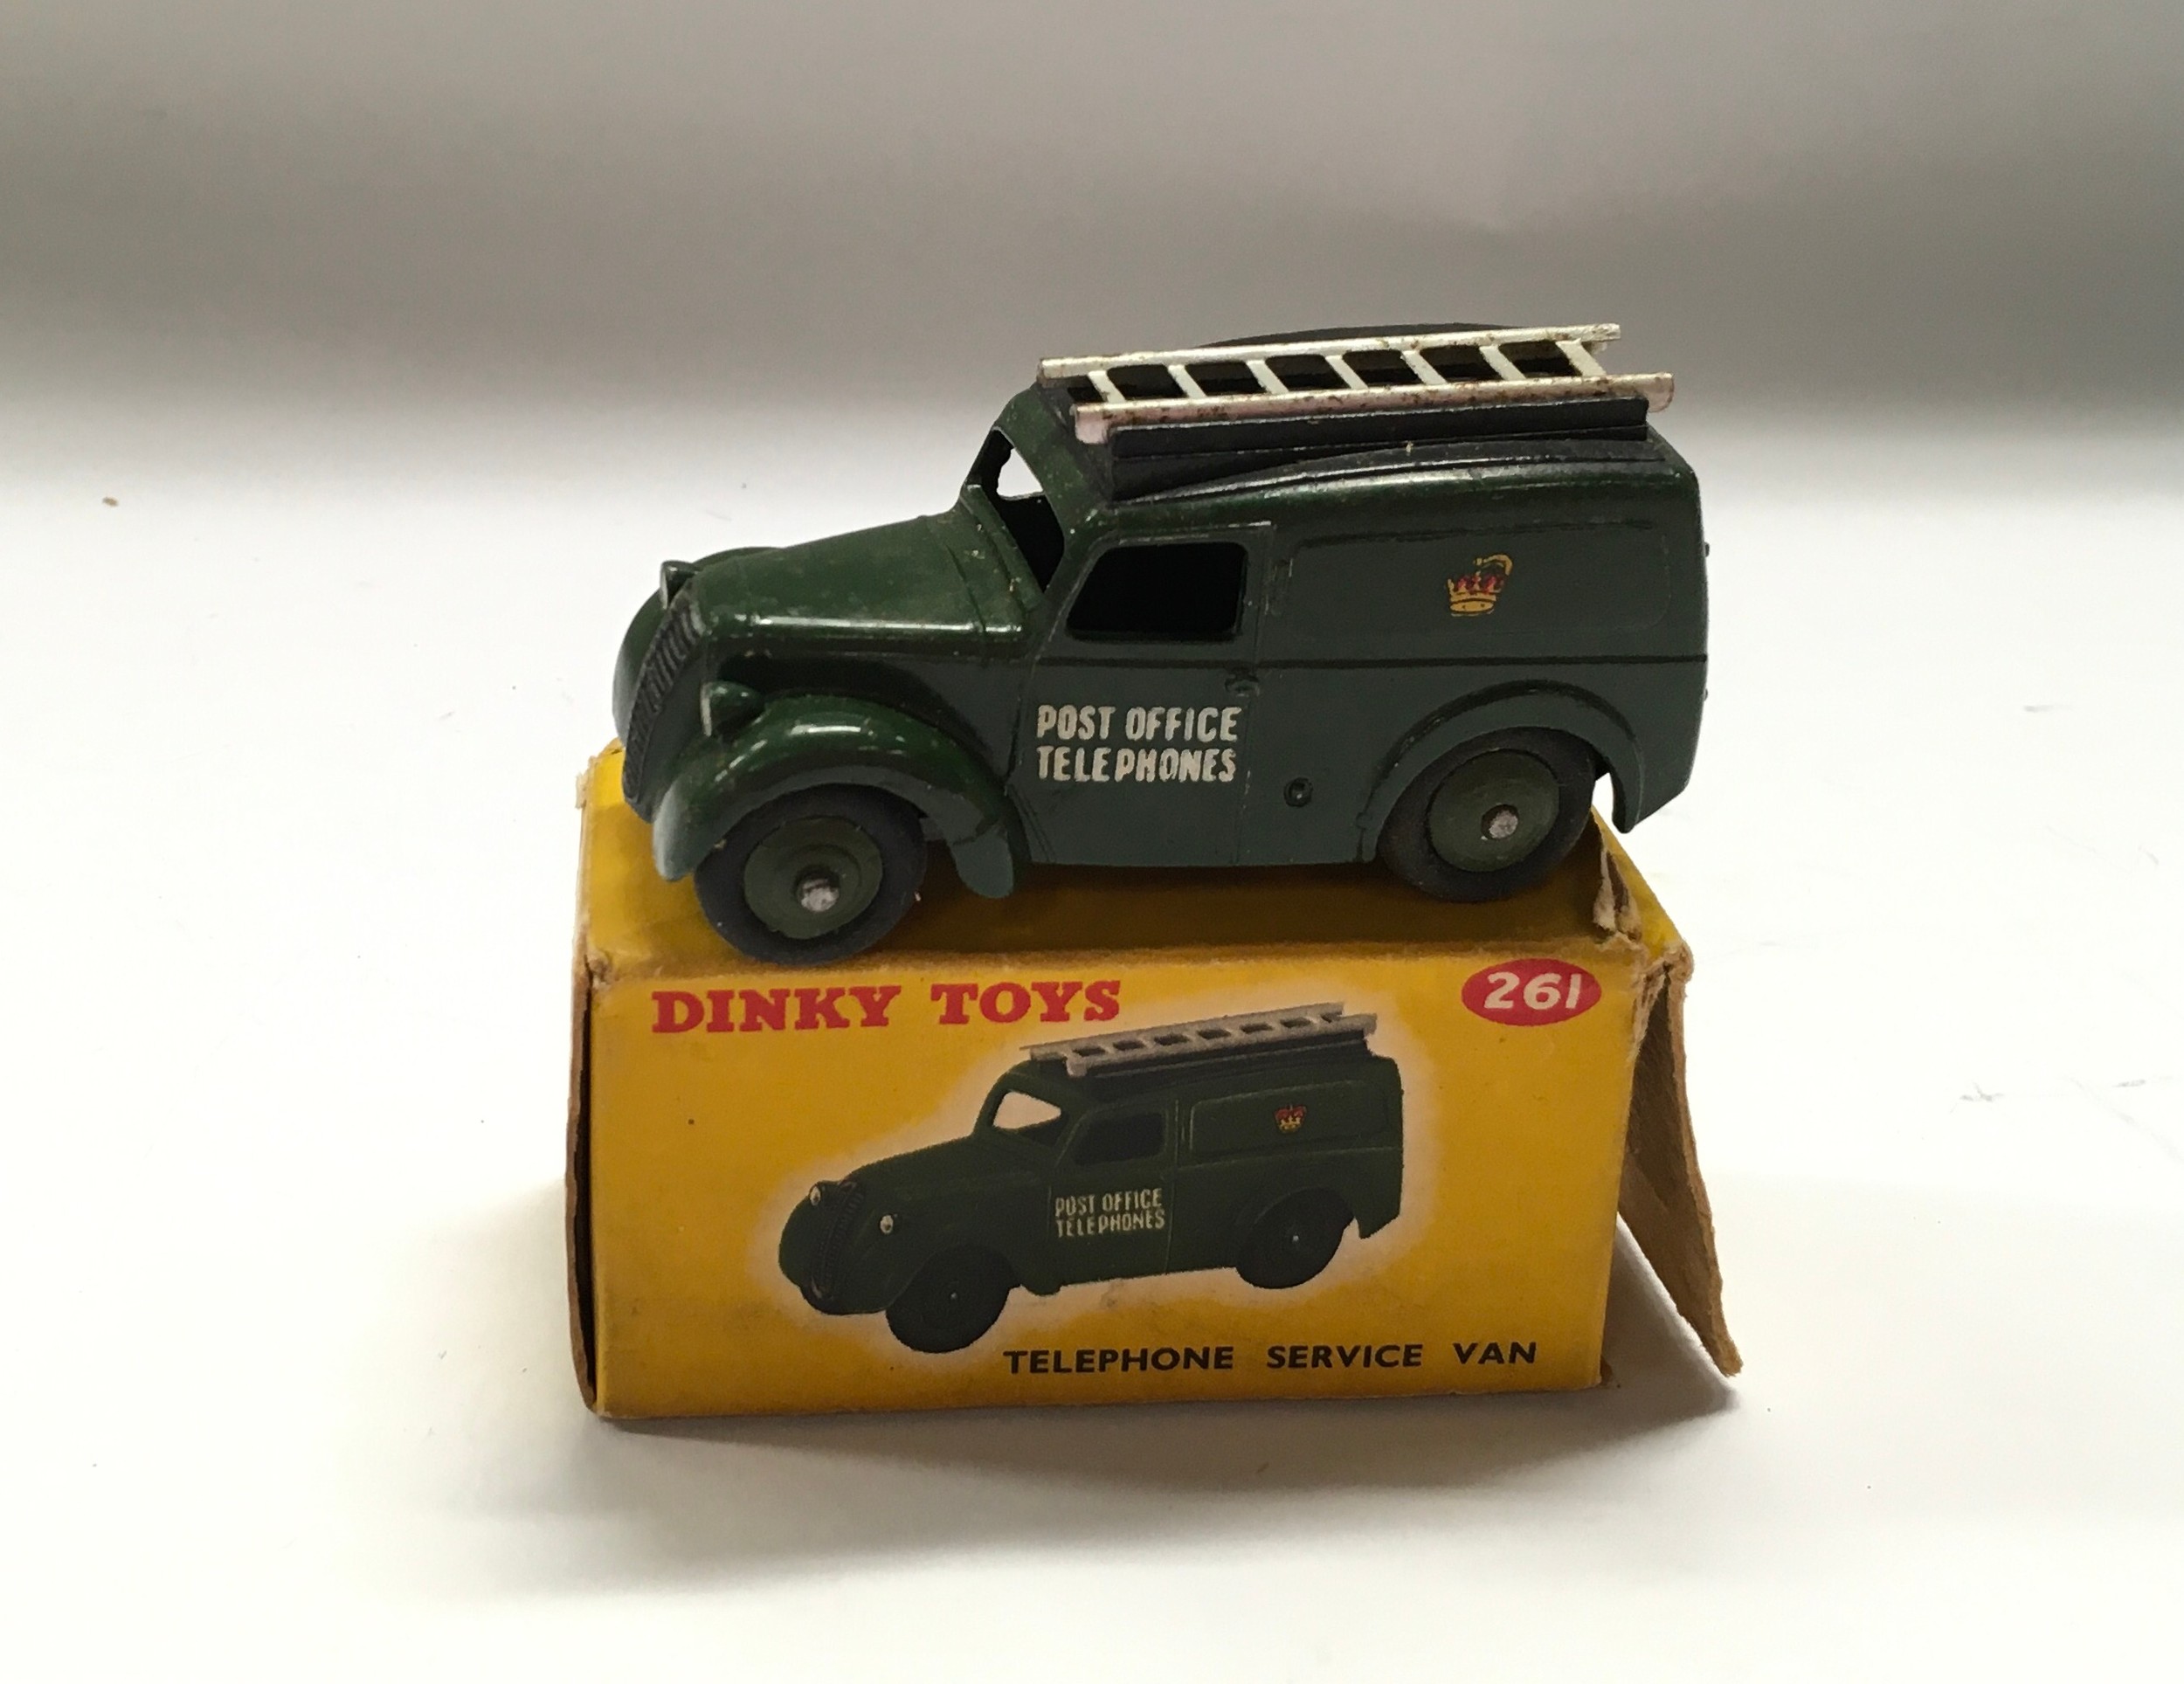 Dinky 261 Morris Telephone Service Van "Post Office Telephones" - green including ridged hubs with